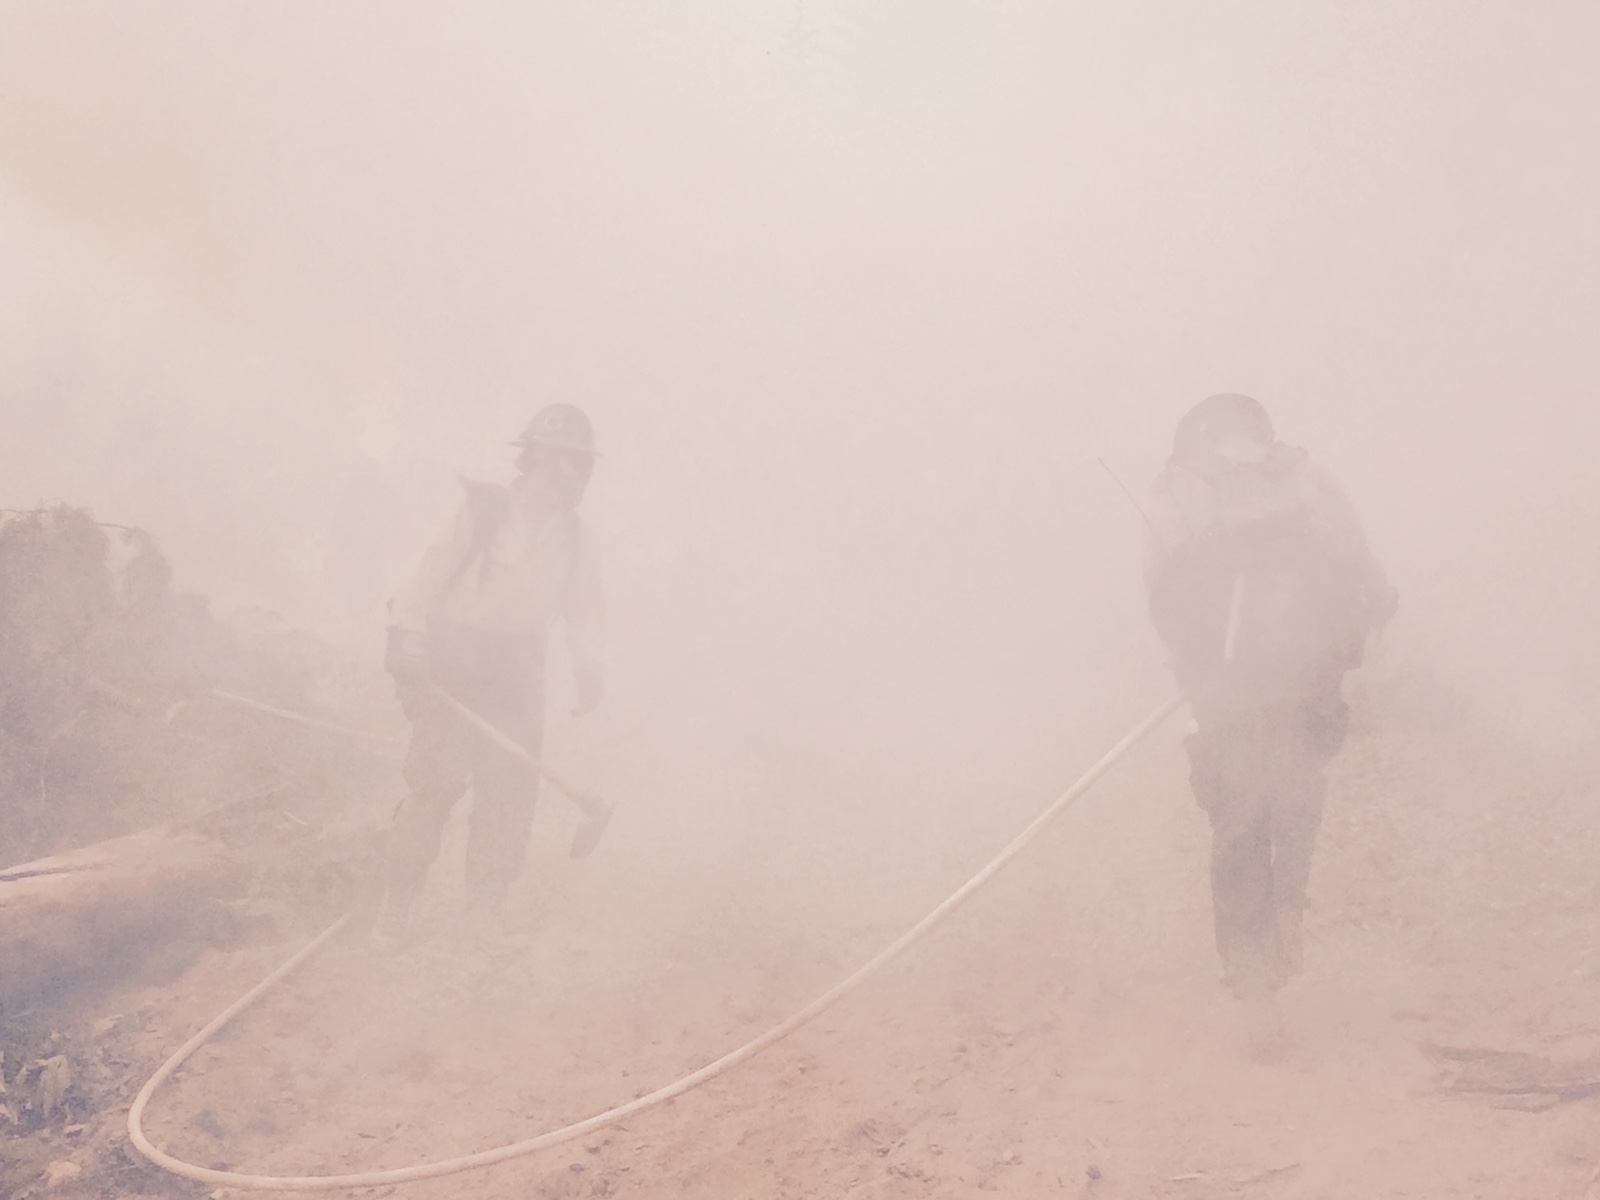 Forest Service Firefighters tackle a smokey section of California wildfires